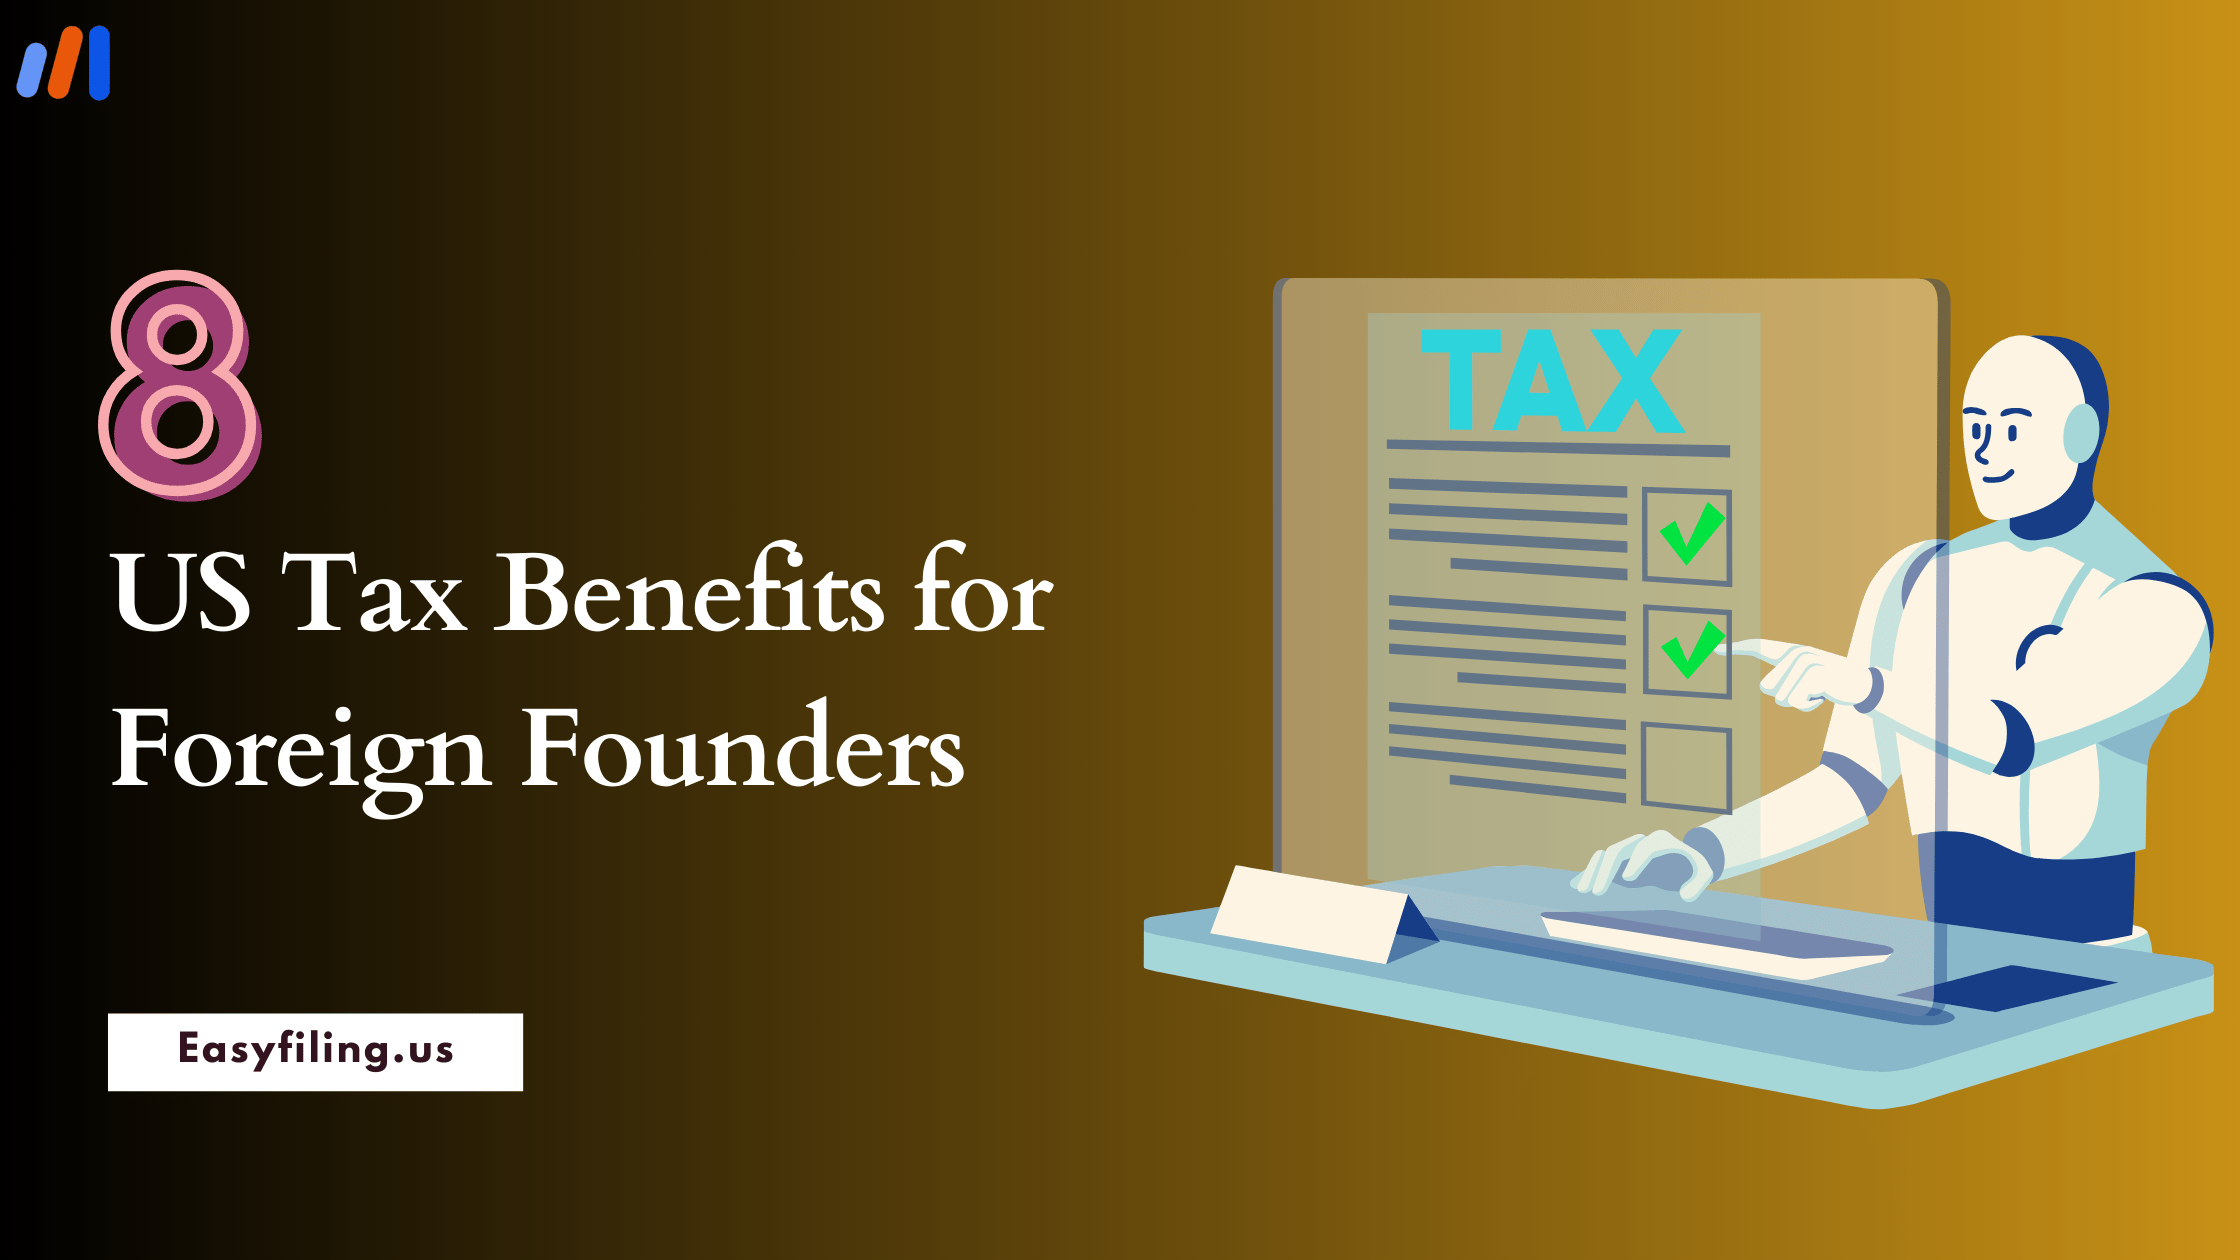 US Tax Benefits for Foreign Founders